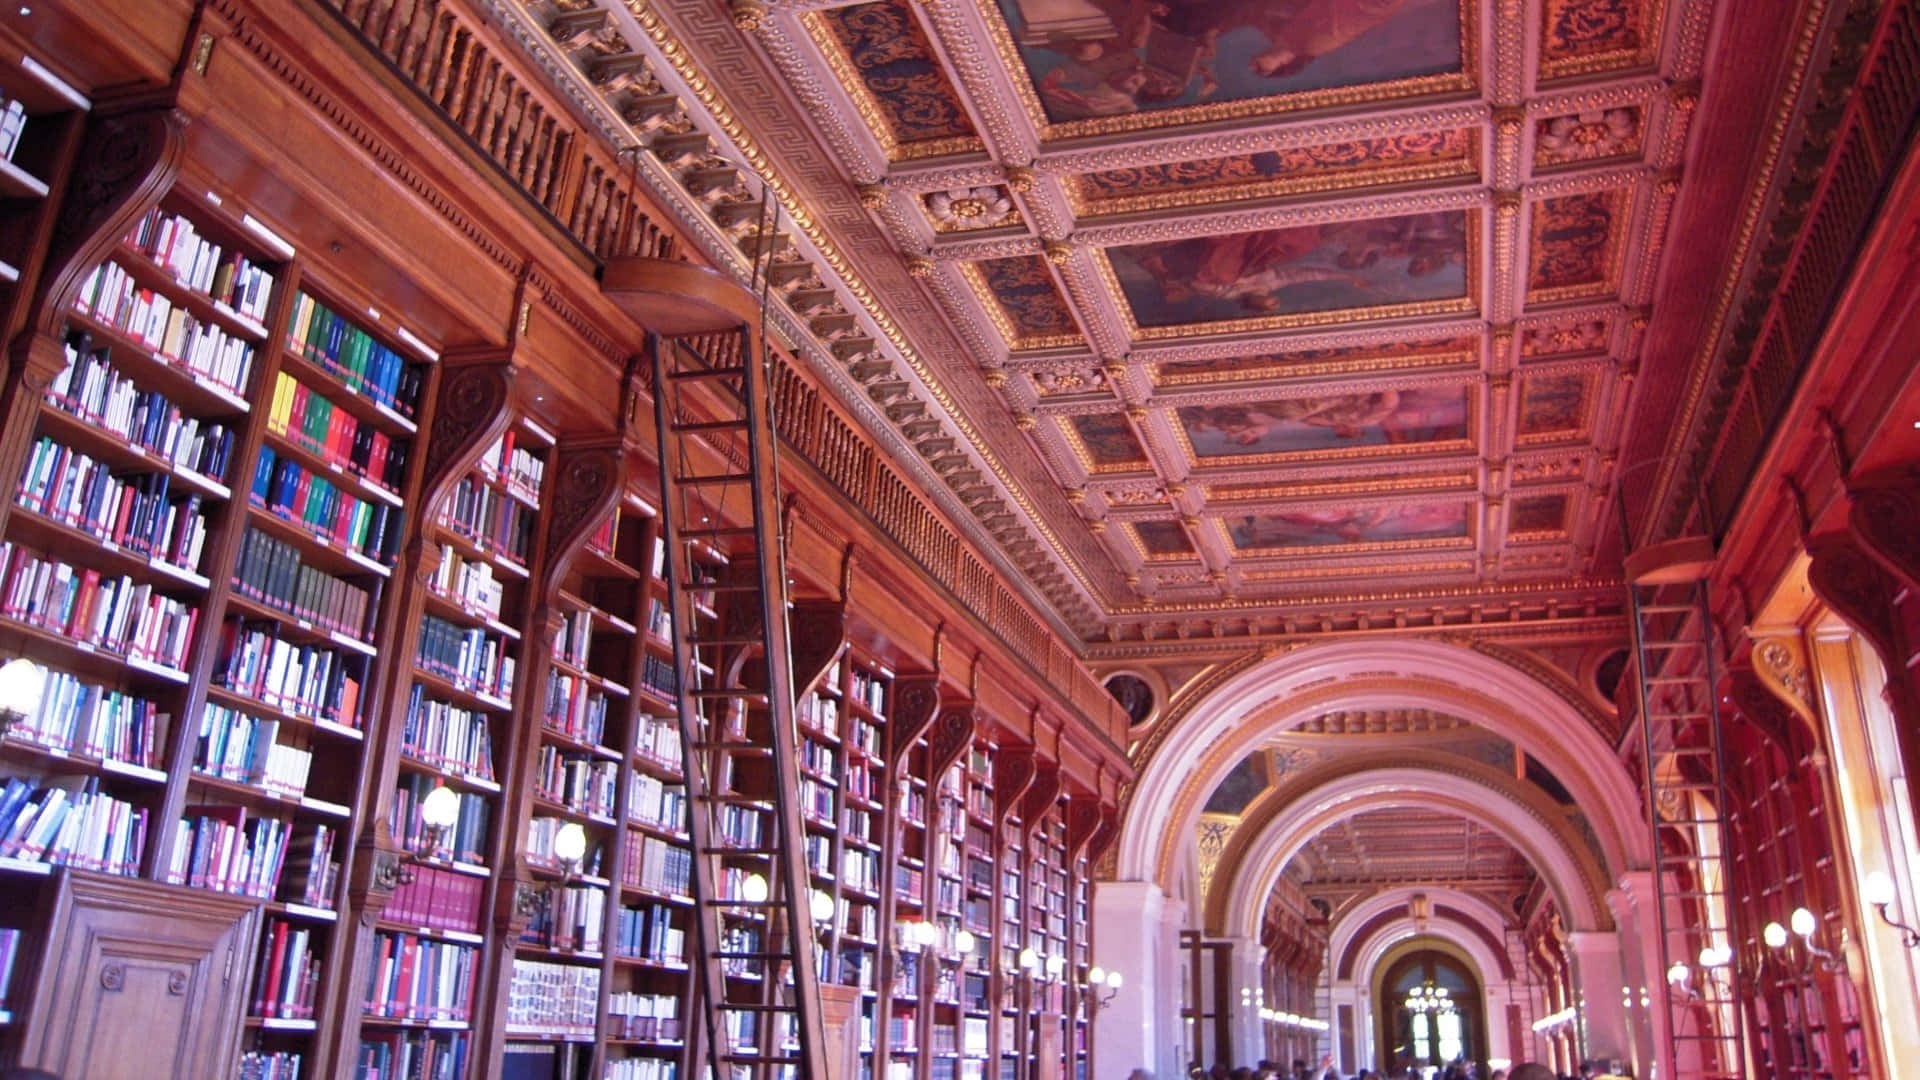 Luxembourg Palace Library Background